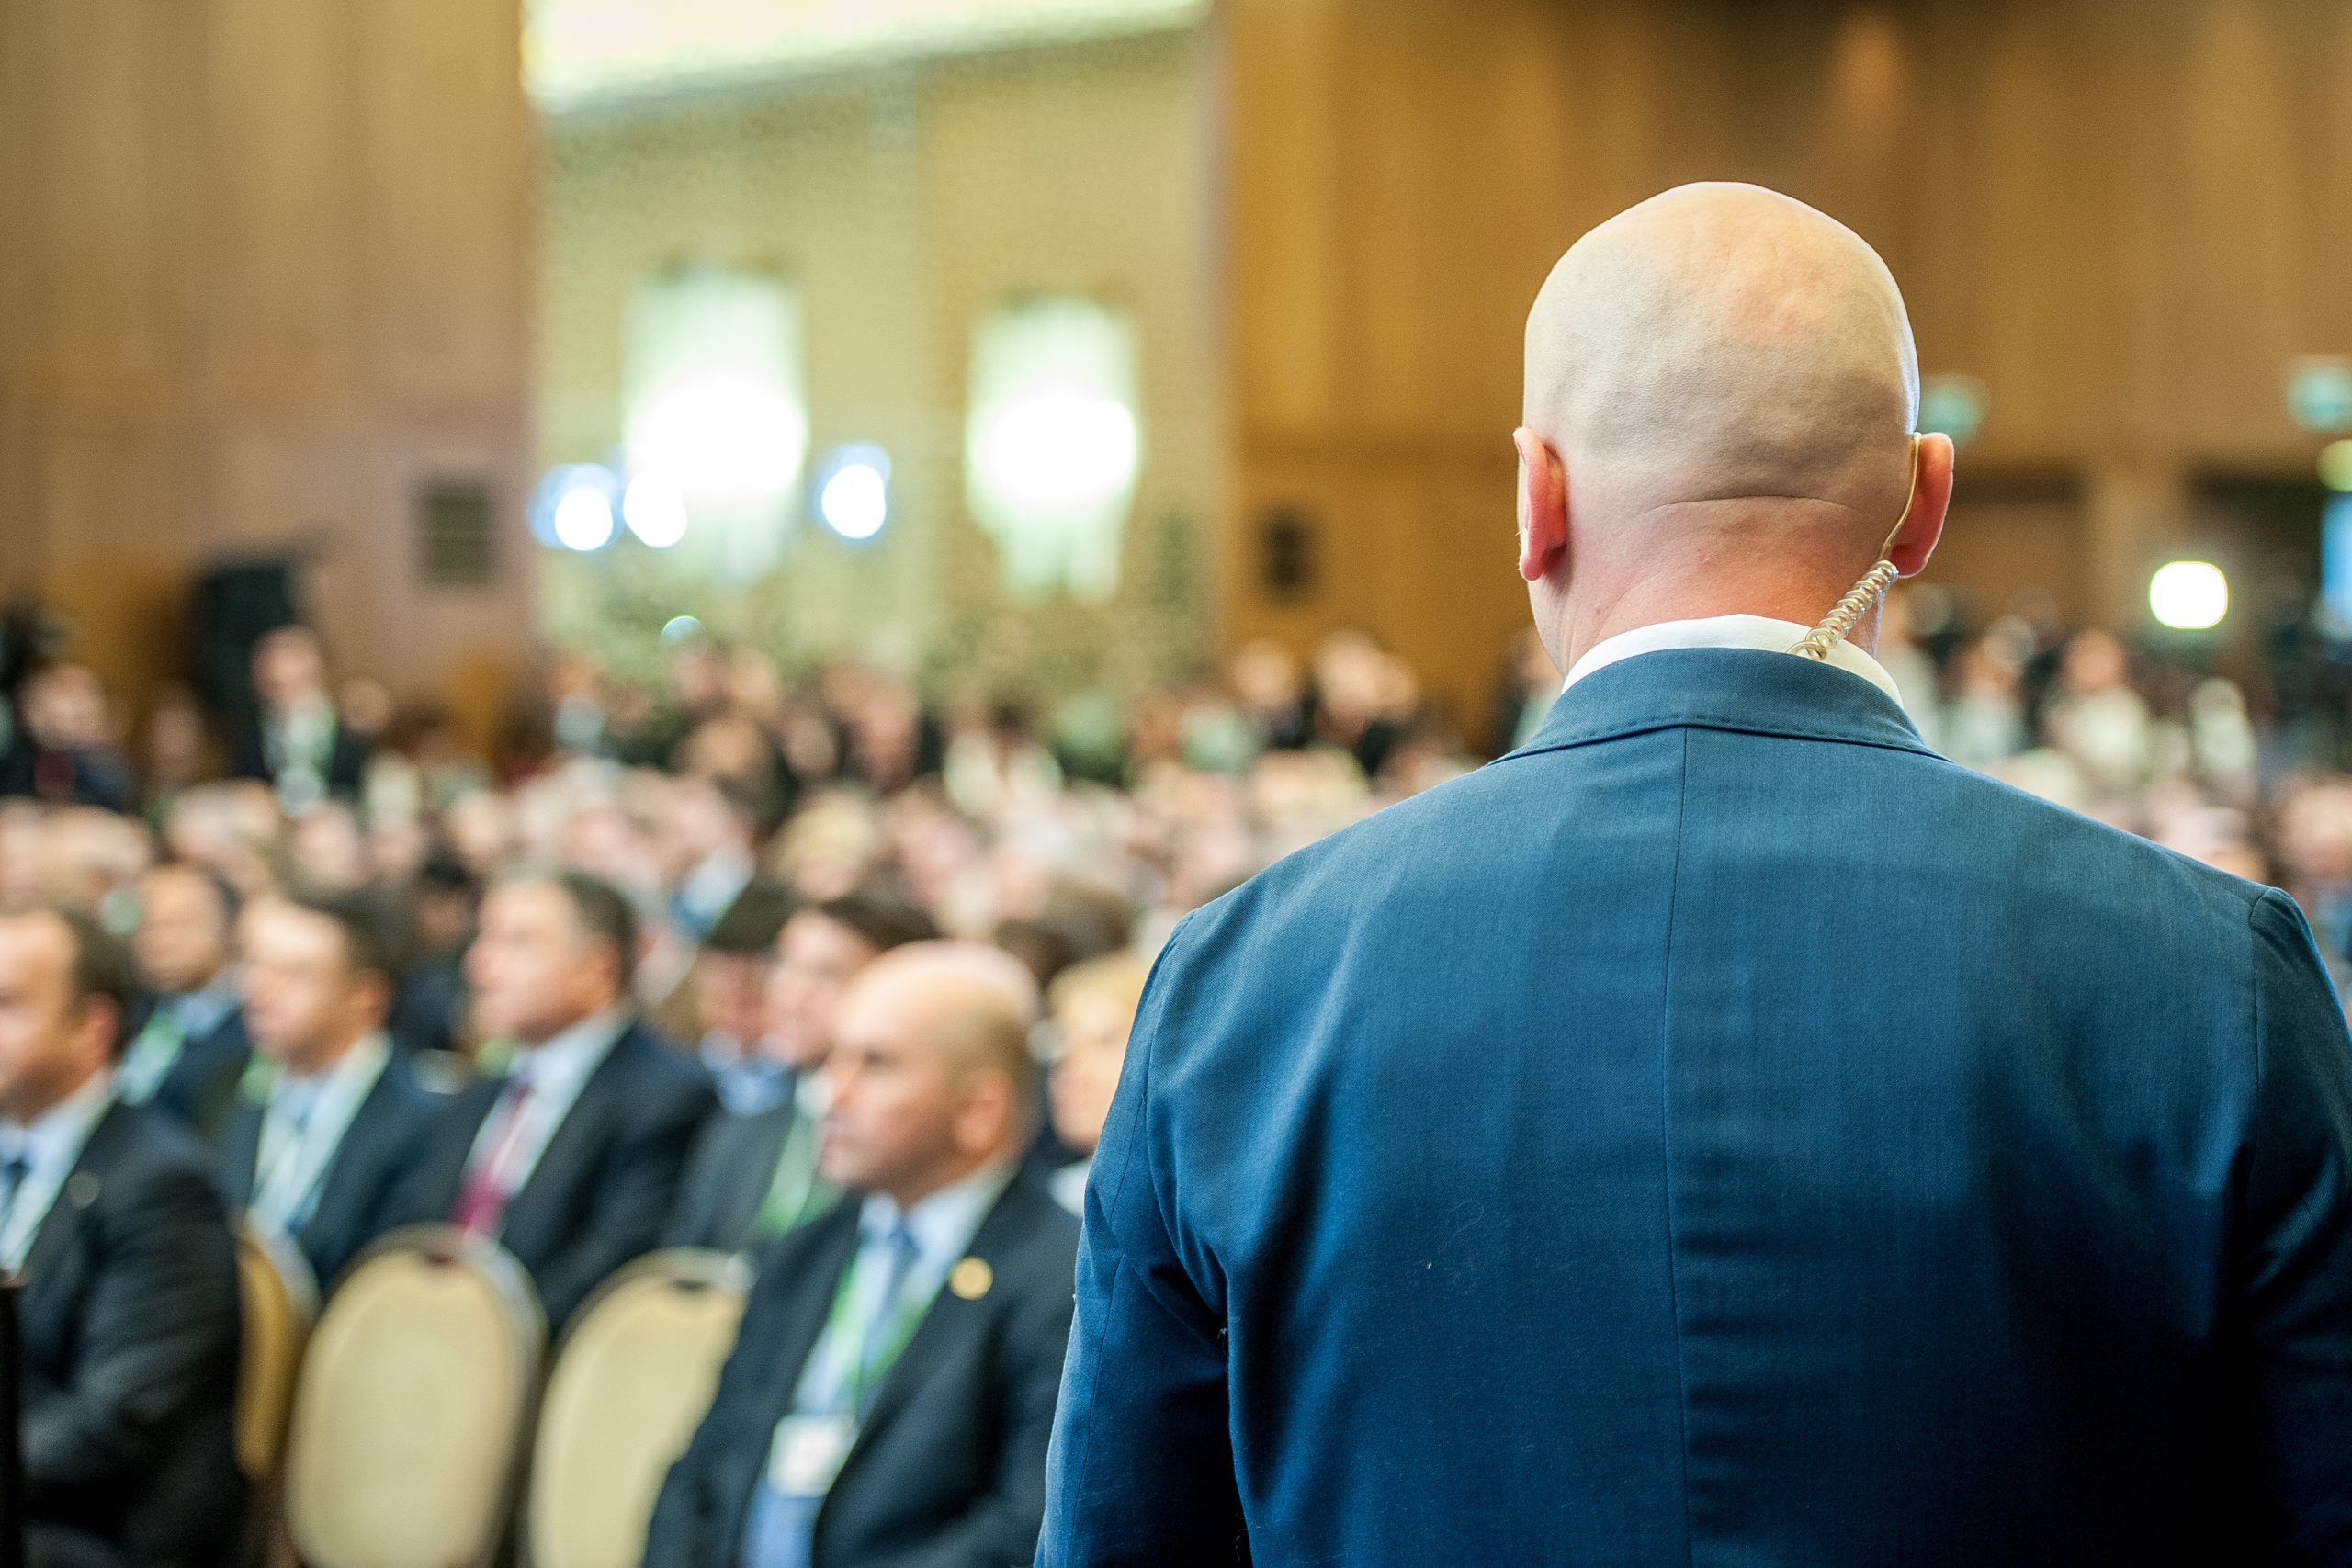 5 Things to Consider For Your Business Event Safety